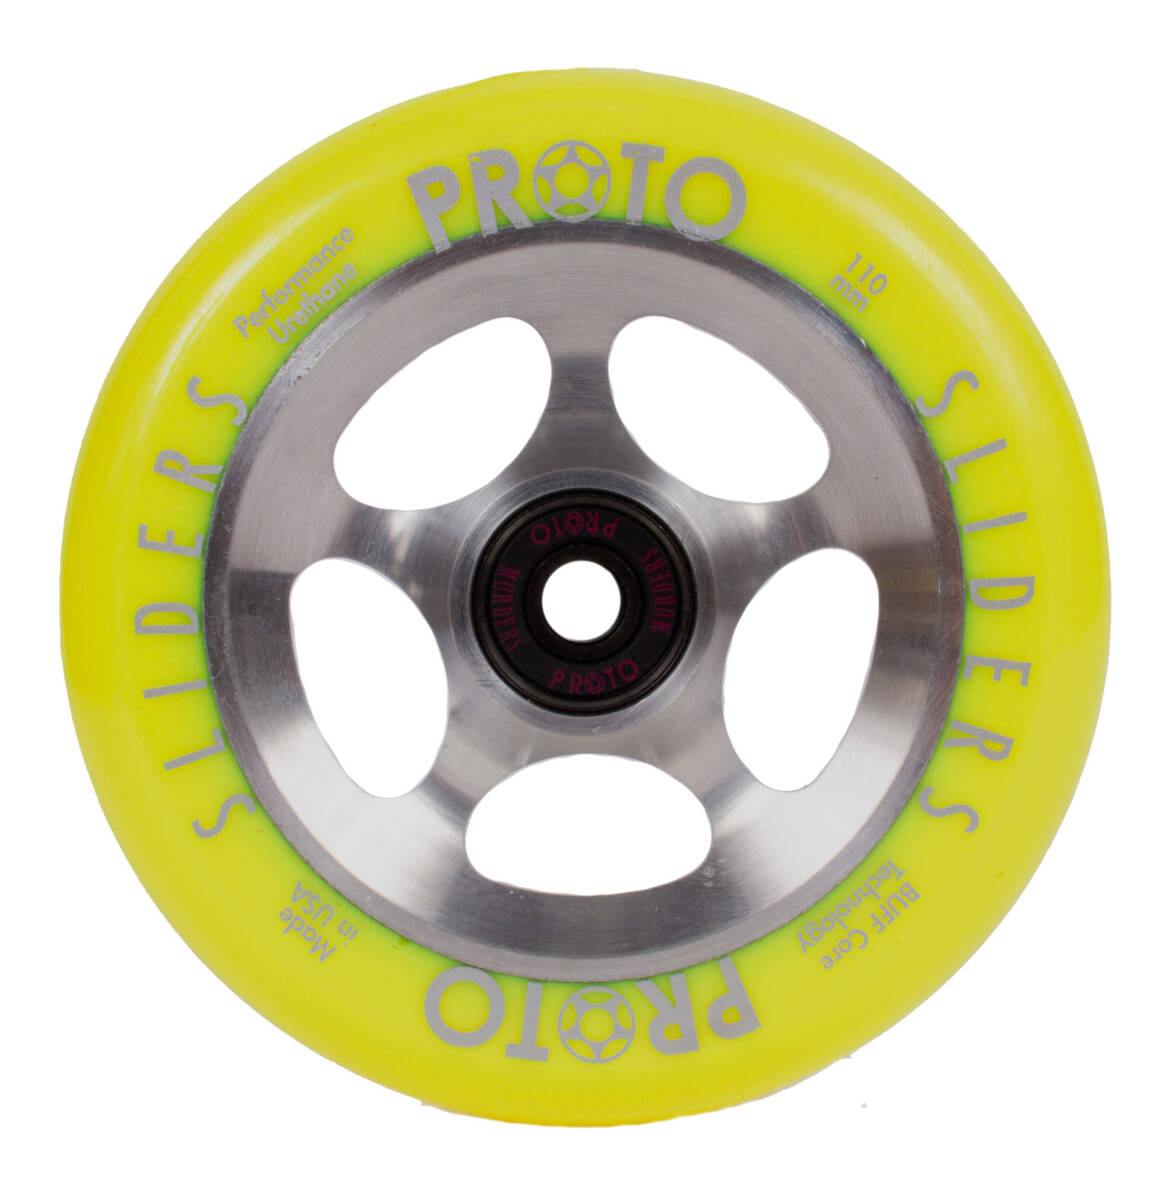 An image of Proto Sliders Starbright 110mm Pro Scooter Wheel - Yellow / Raw